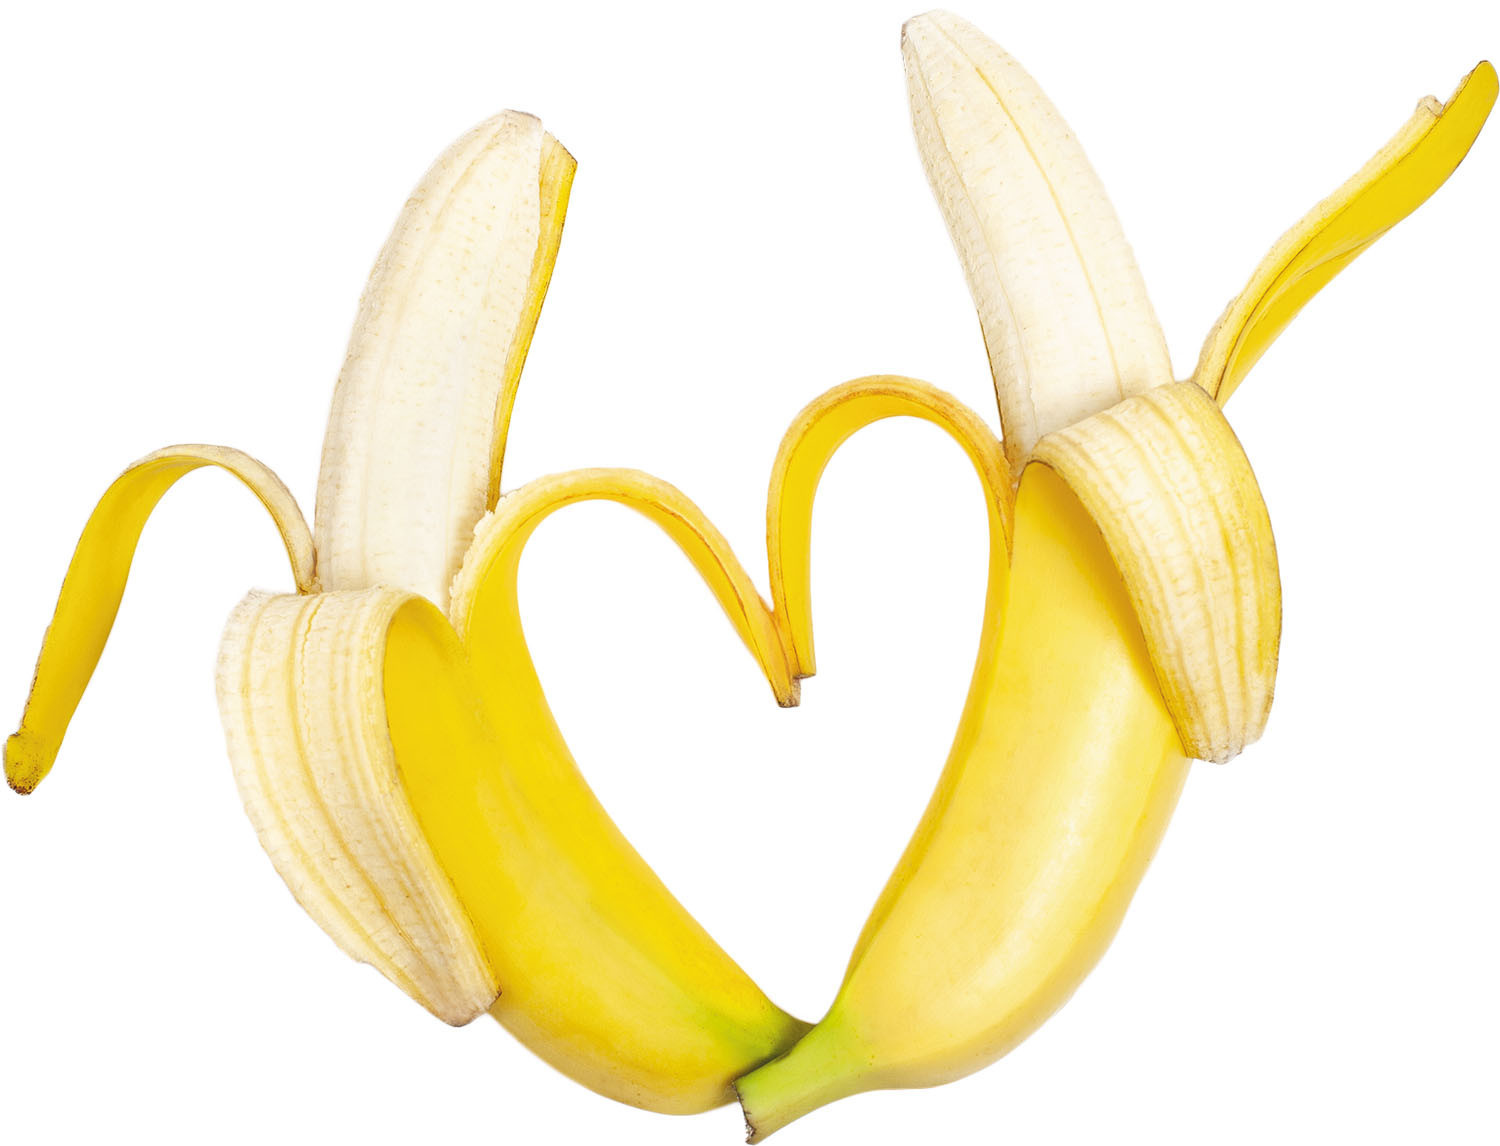 Two peeled bananas forming a heart